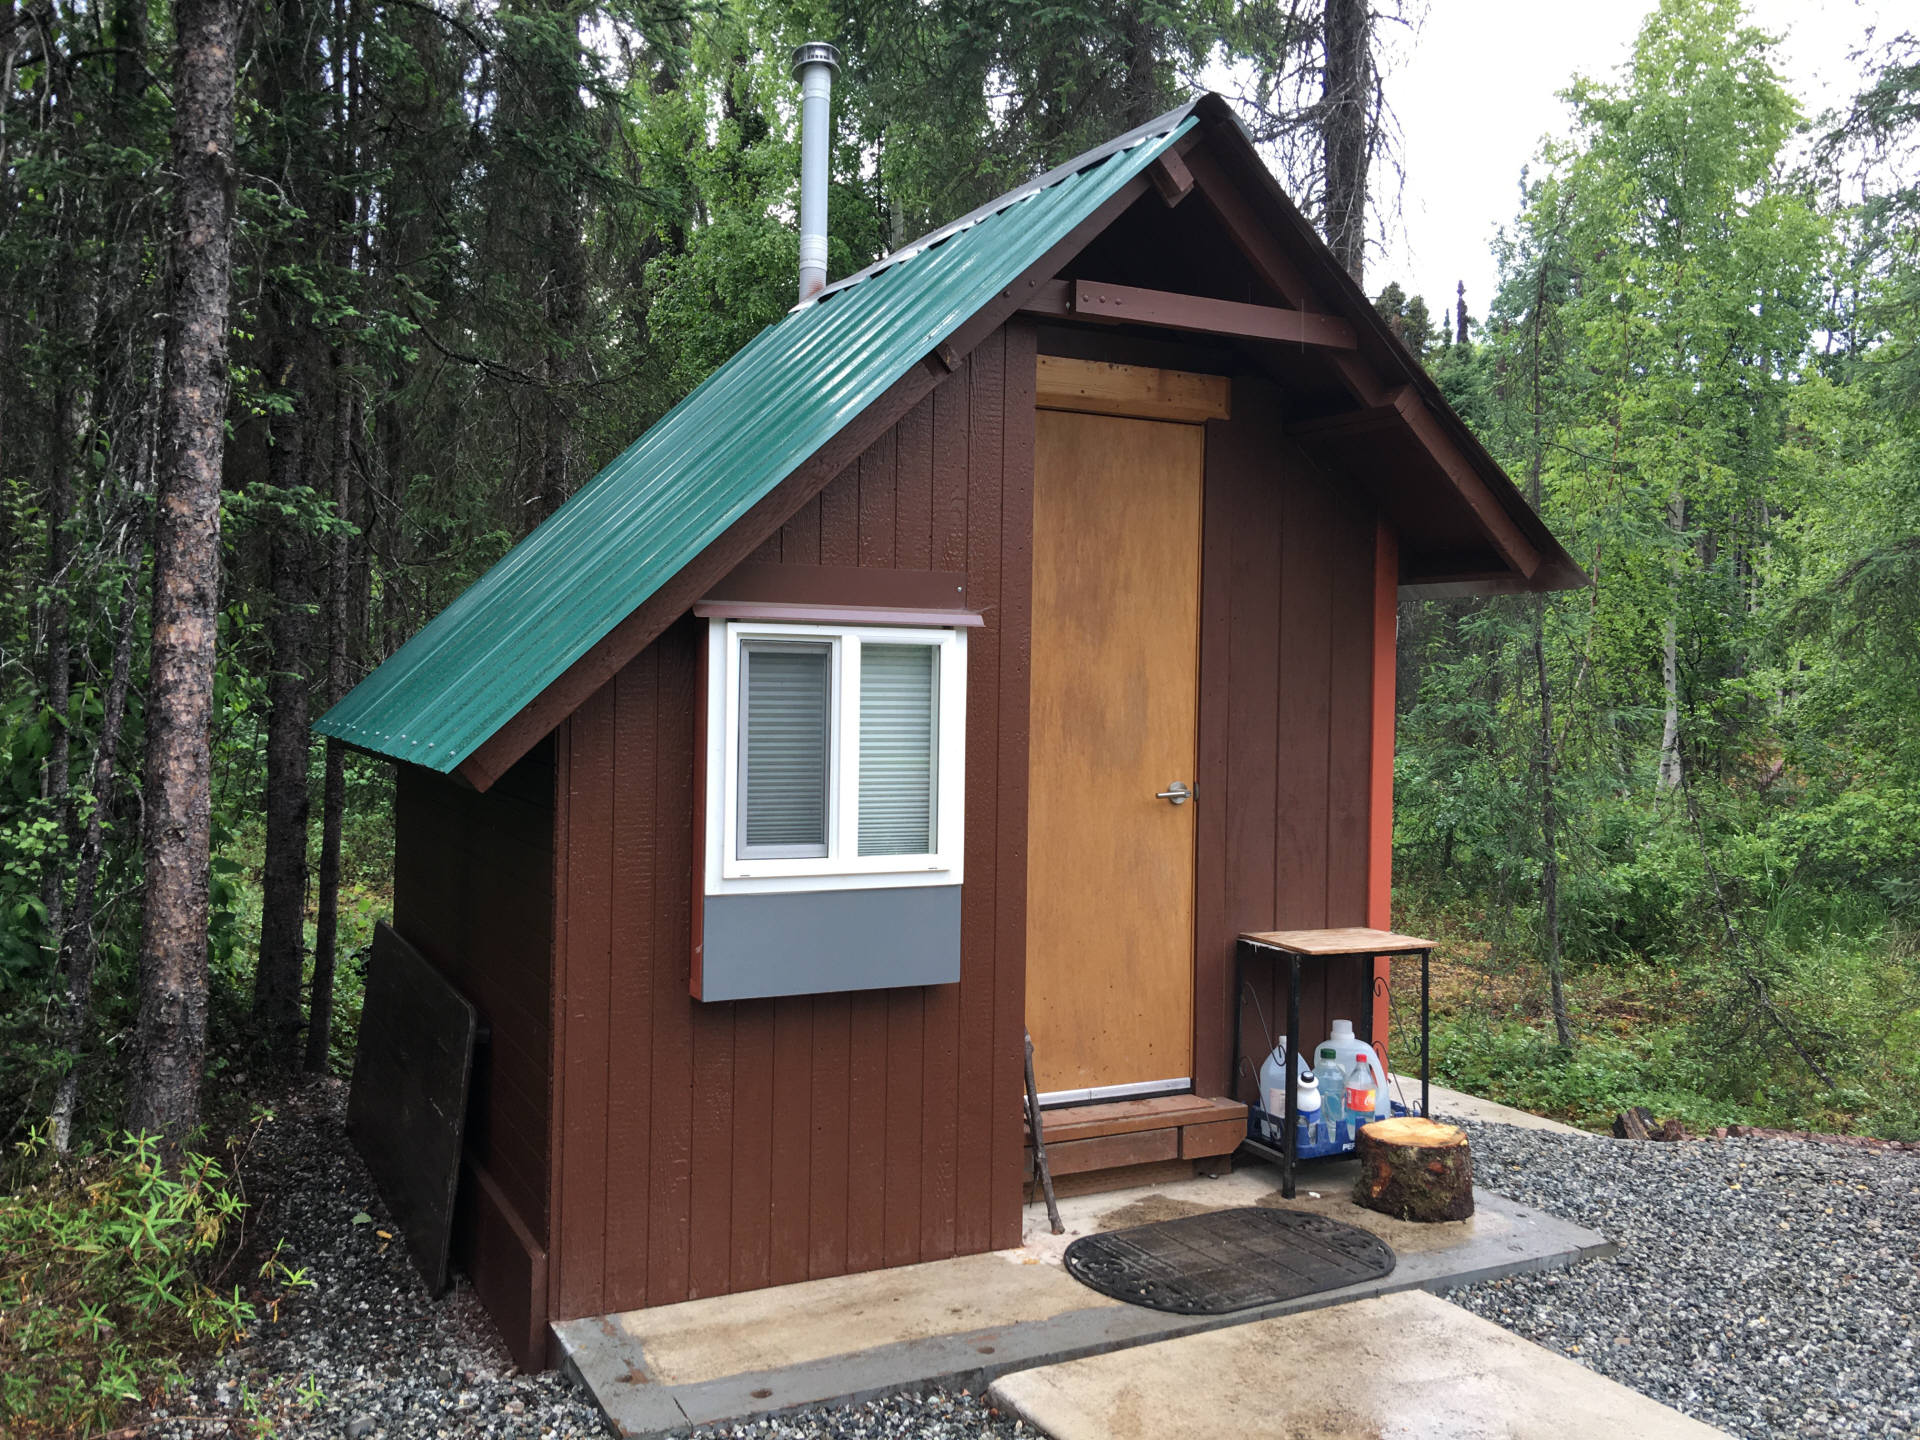 This outbuilding is actually a comfortable toilet. Inside there is a sink with water for washing hands and even a sleeping cabin. But if you have a large number of guests, you will need to order additional portable toilet cabins yourself. For hygiene purposes, this toilet is for seated guests only.